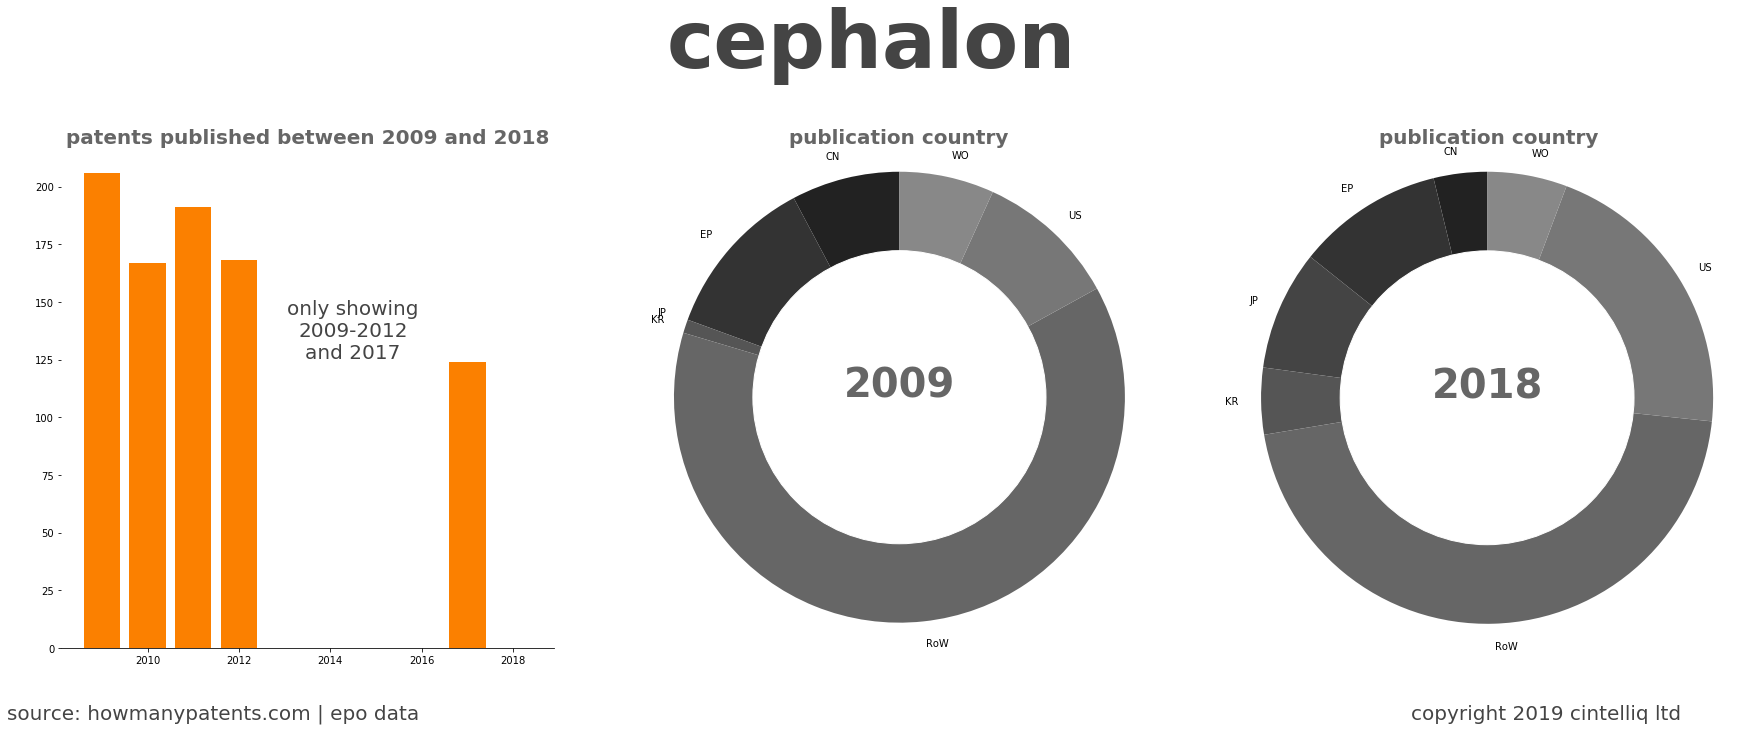 summary of patents for Cephalon